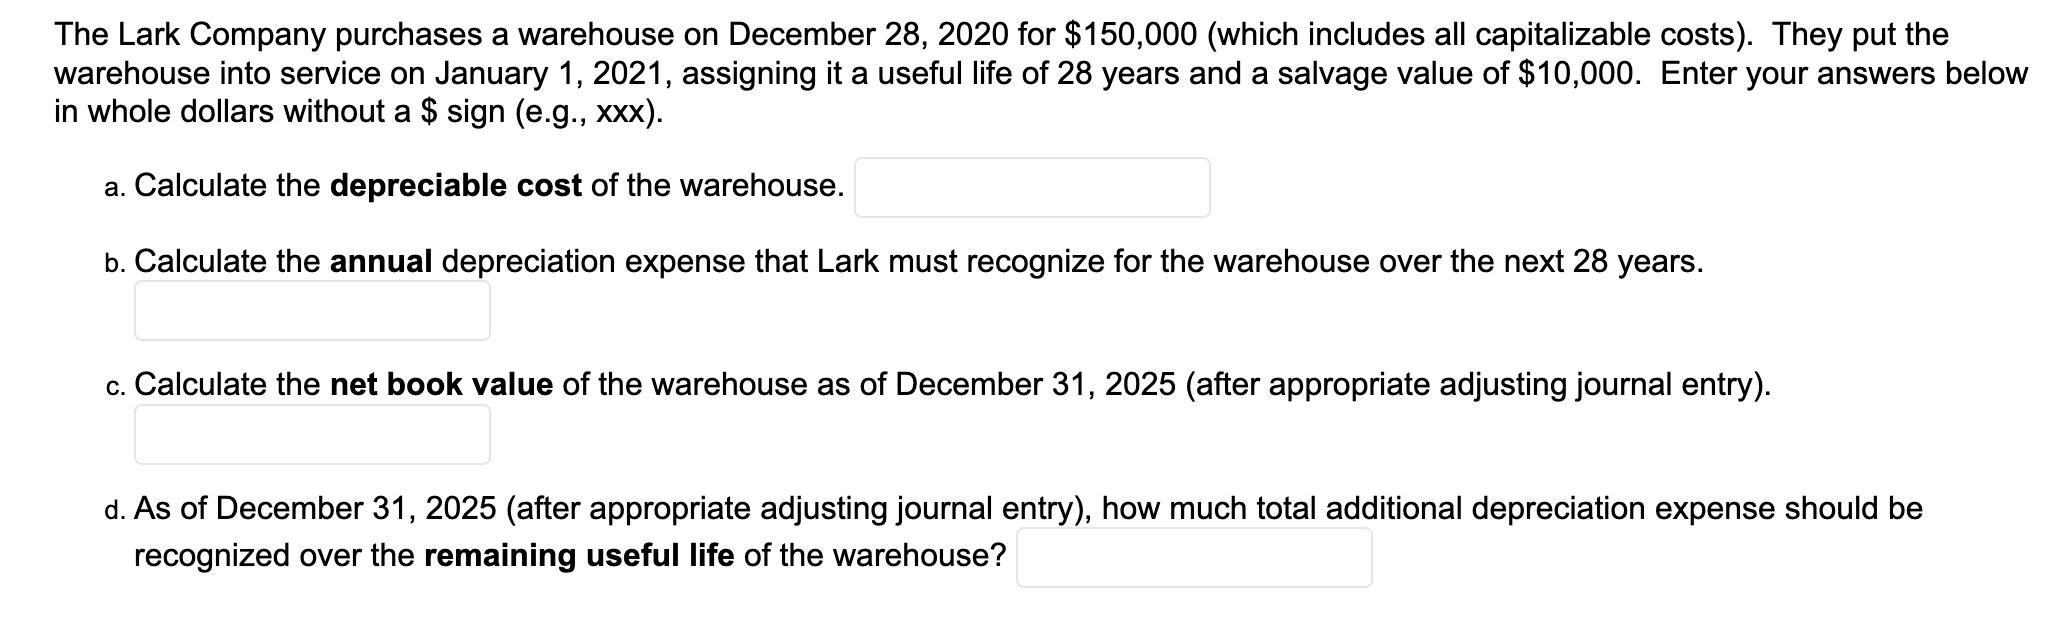 The Lark Company purchases a warehouse on December 28, 2020 for $150,000 (which includes all capitalizable costs). They put t